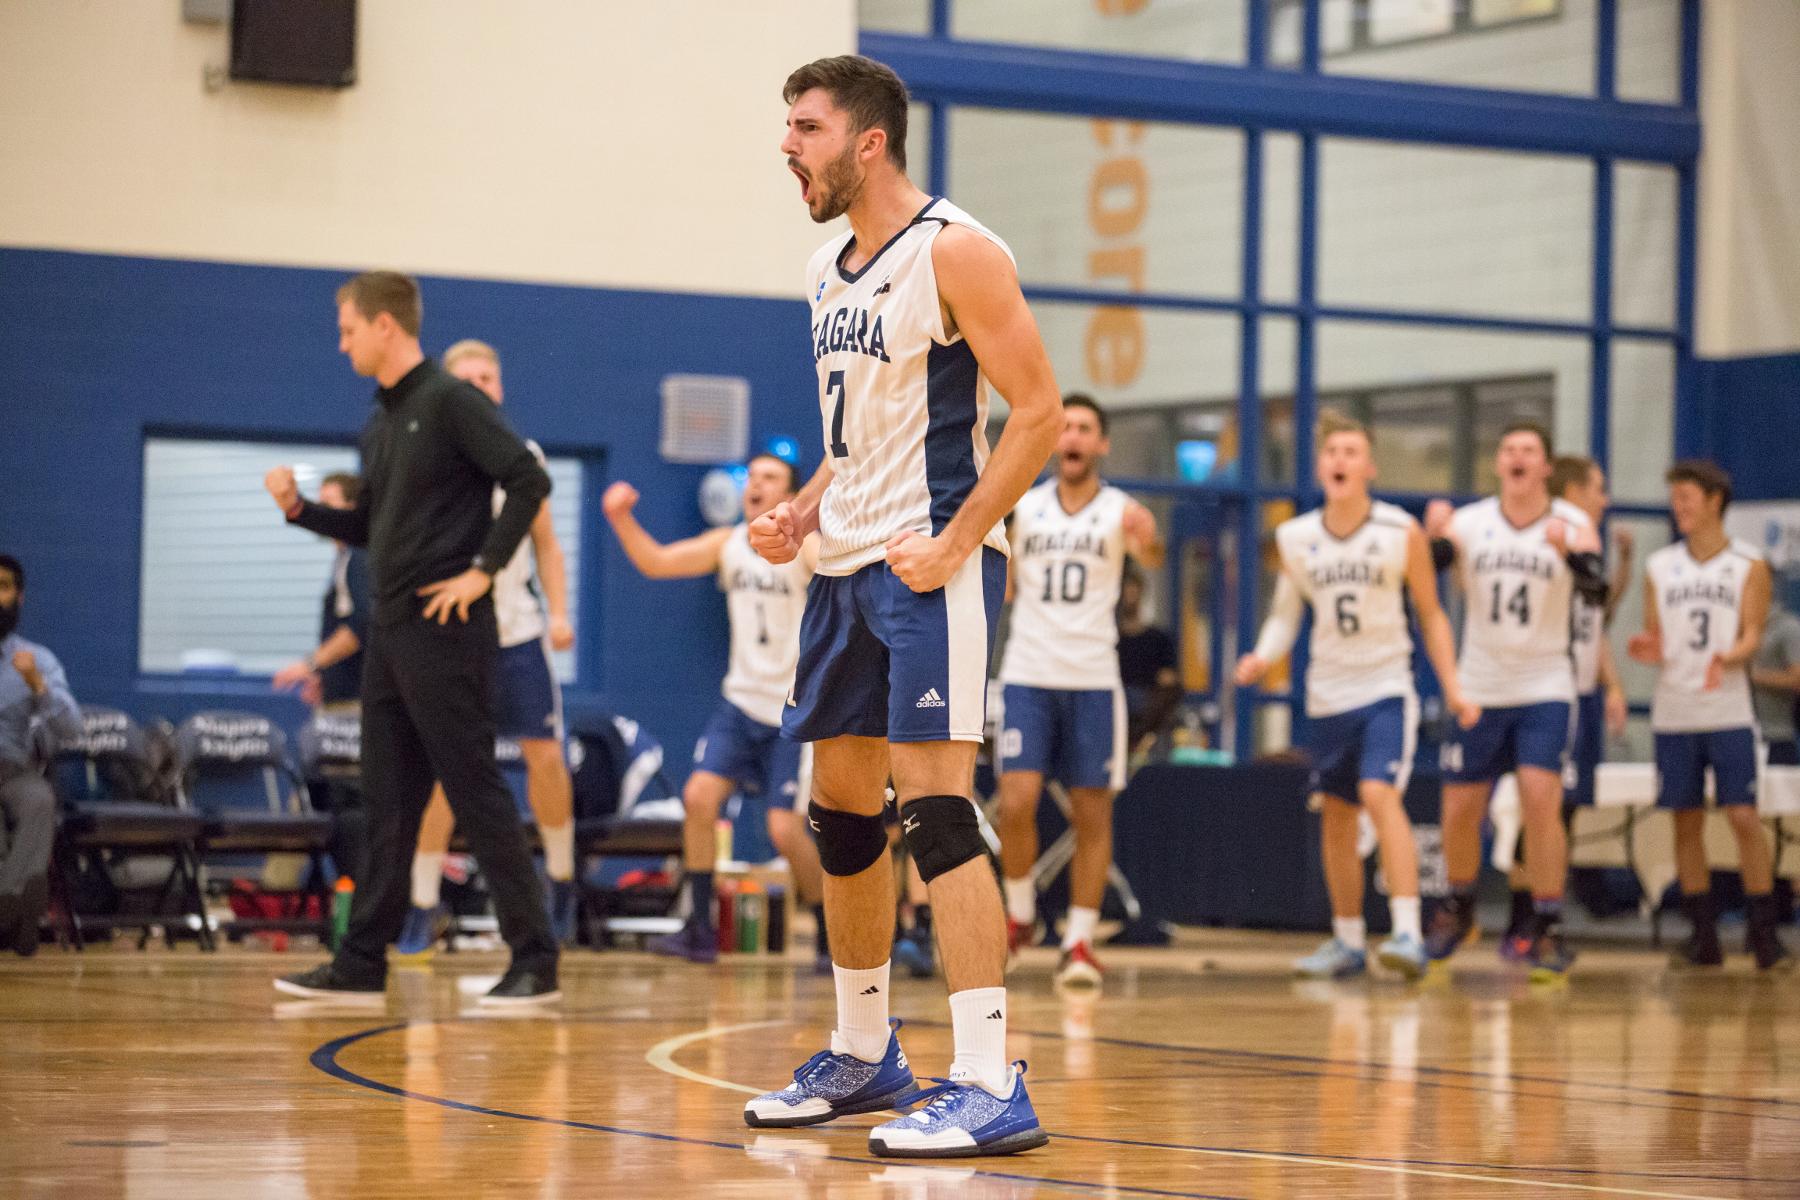 PREVIEW: Knights seek fifth straight victory against tough Humber squad